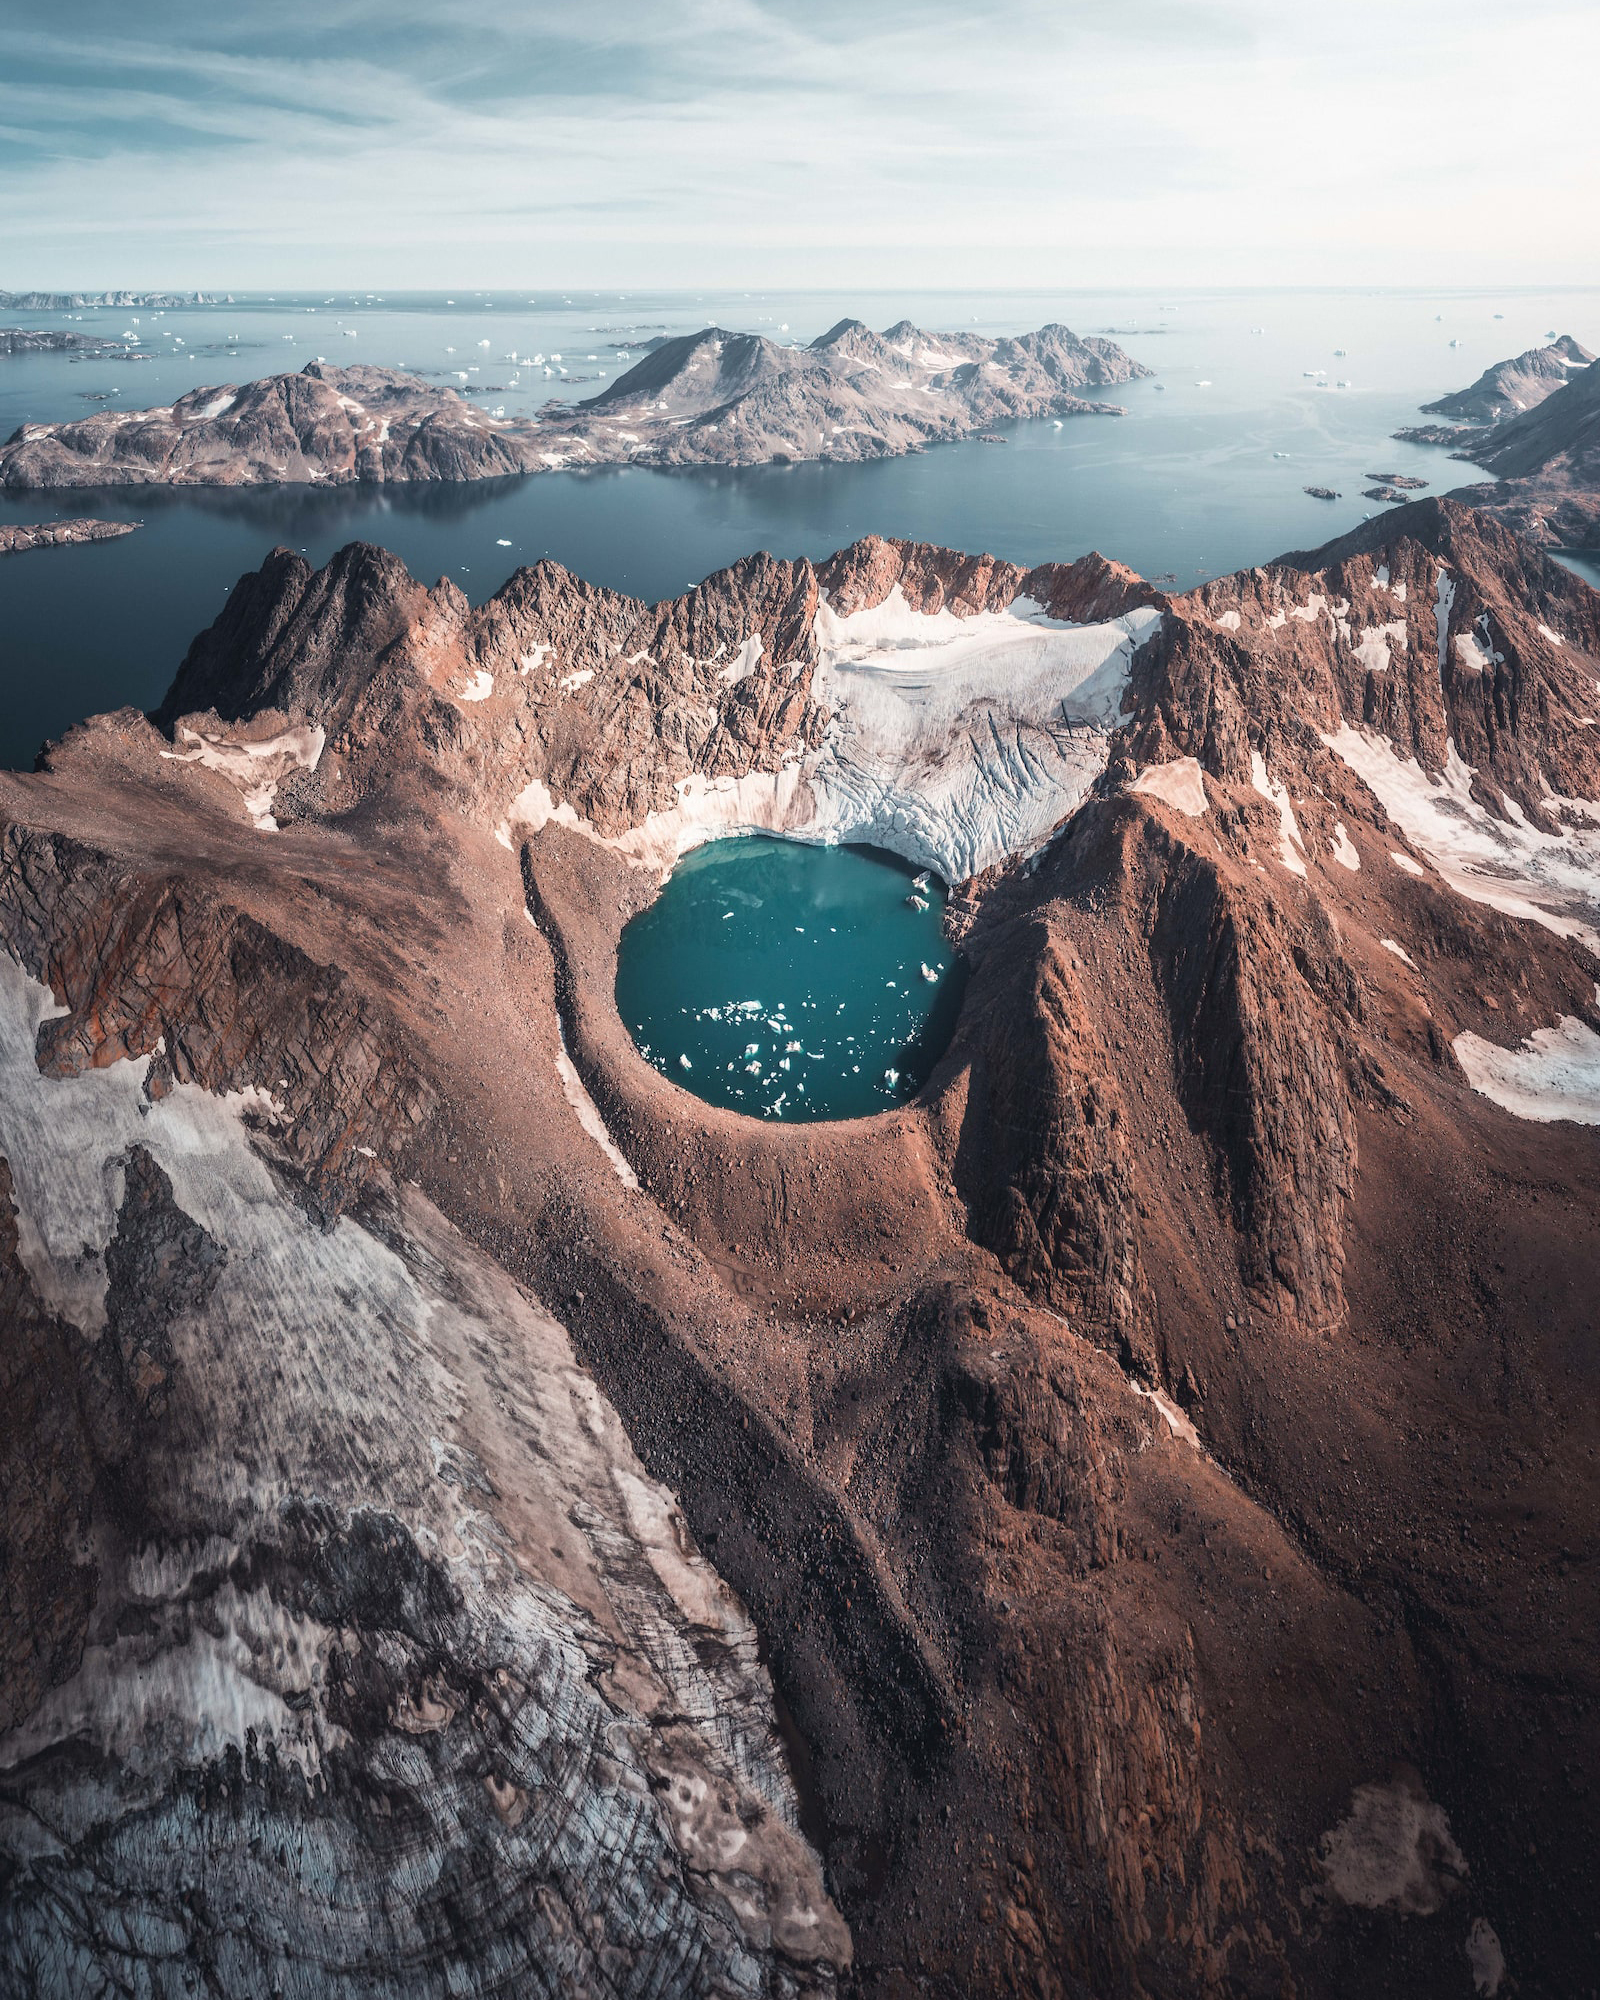 The blue lagoon in the hand of a mountain. Photo by Norris Niman - Visit Greenland